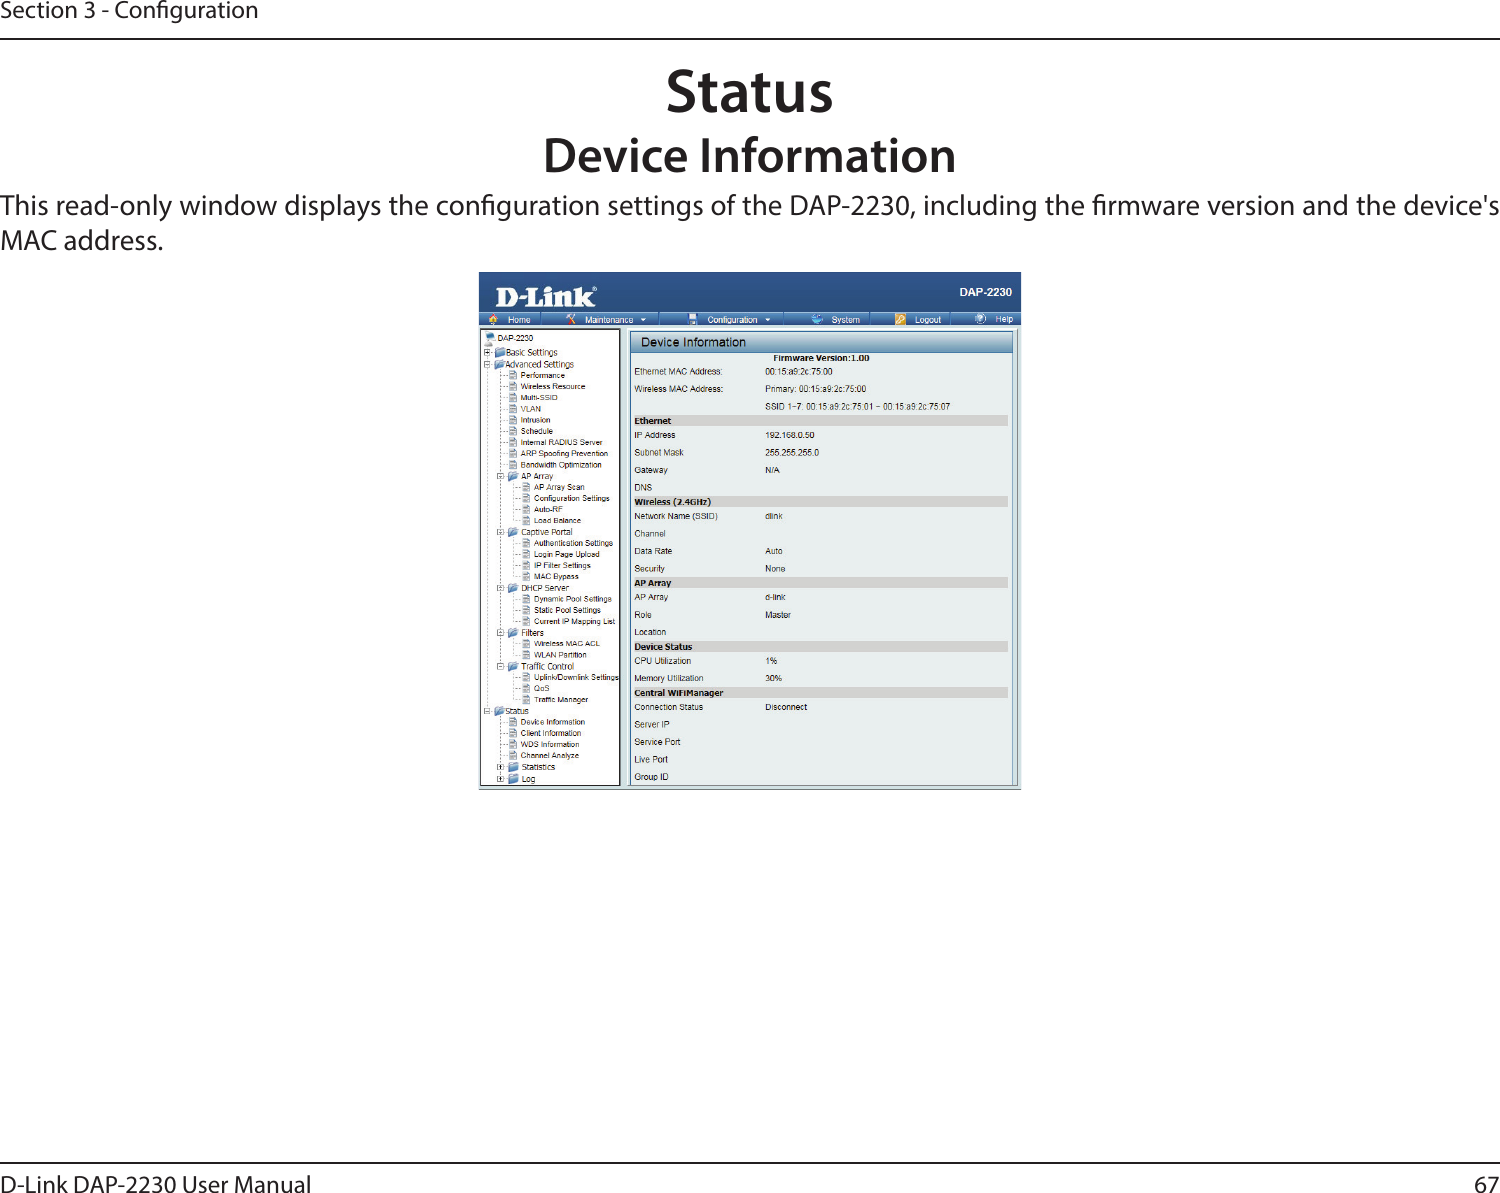 67D-Link DAP-2230 User ManualSection 3 - CongurationStatus Device InformationThis read-only window displays the conguration settings of the DAP-2230, including the rmware version and the device&apos;s MAC address.